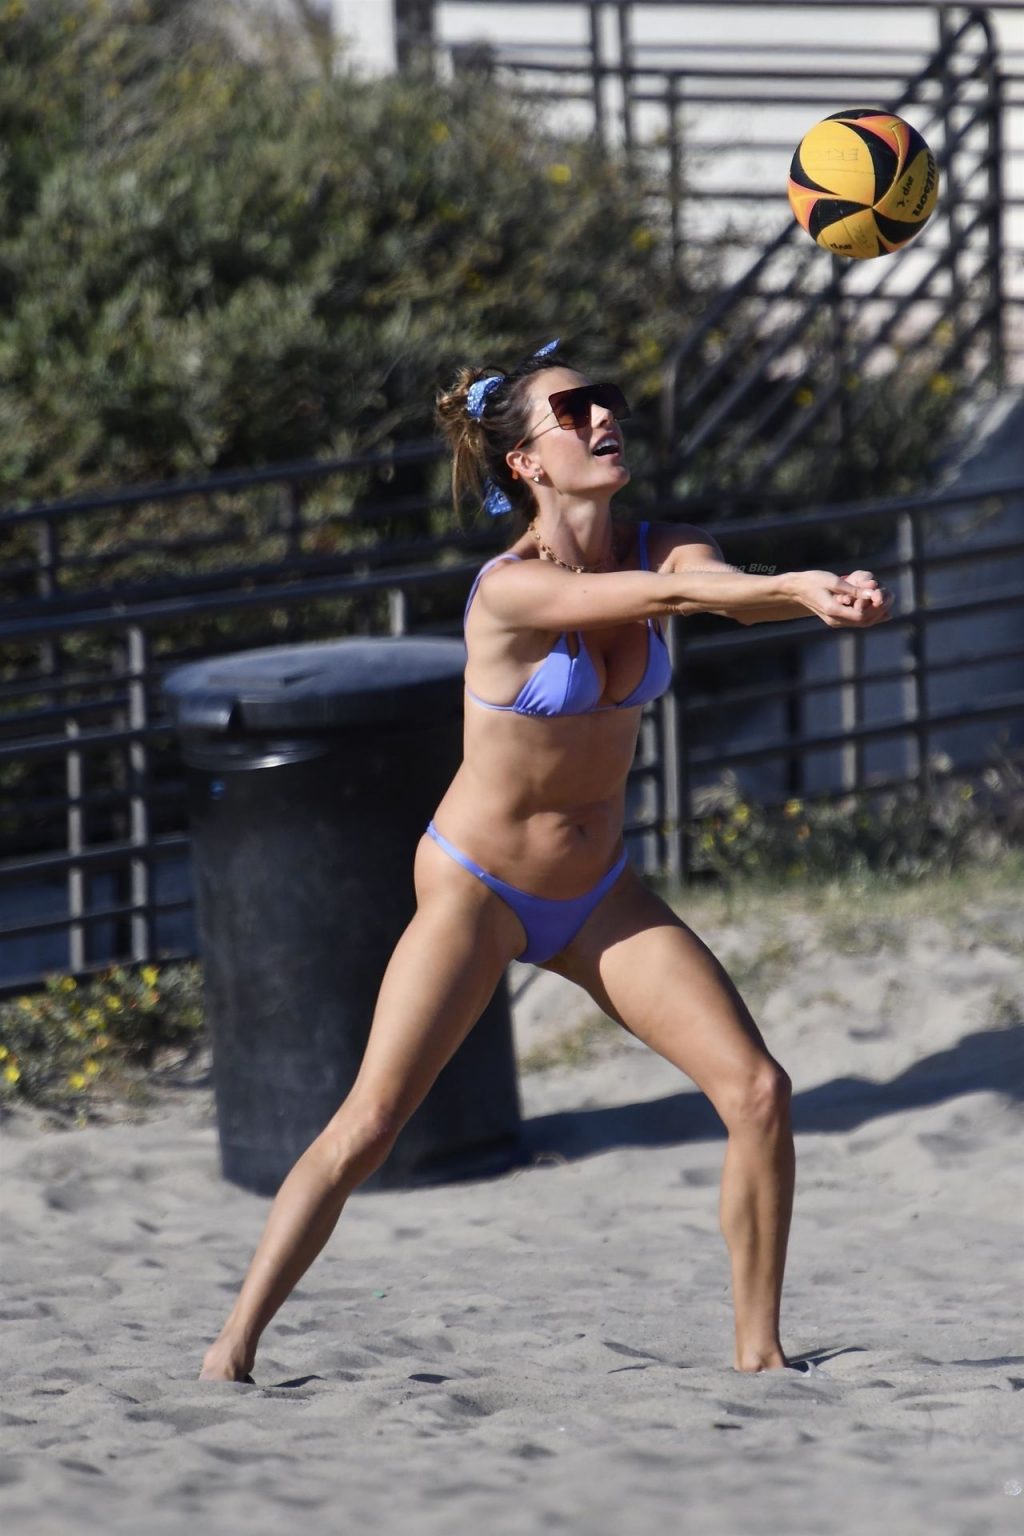 Alessandra Ambrosio Flaunts Her Pin-Up Bikini Body During Volleyball Practice (102 Photos)